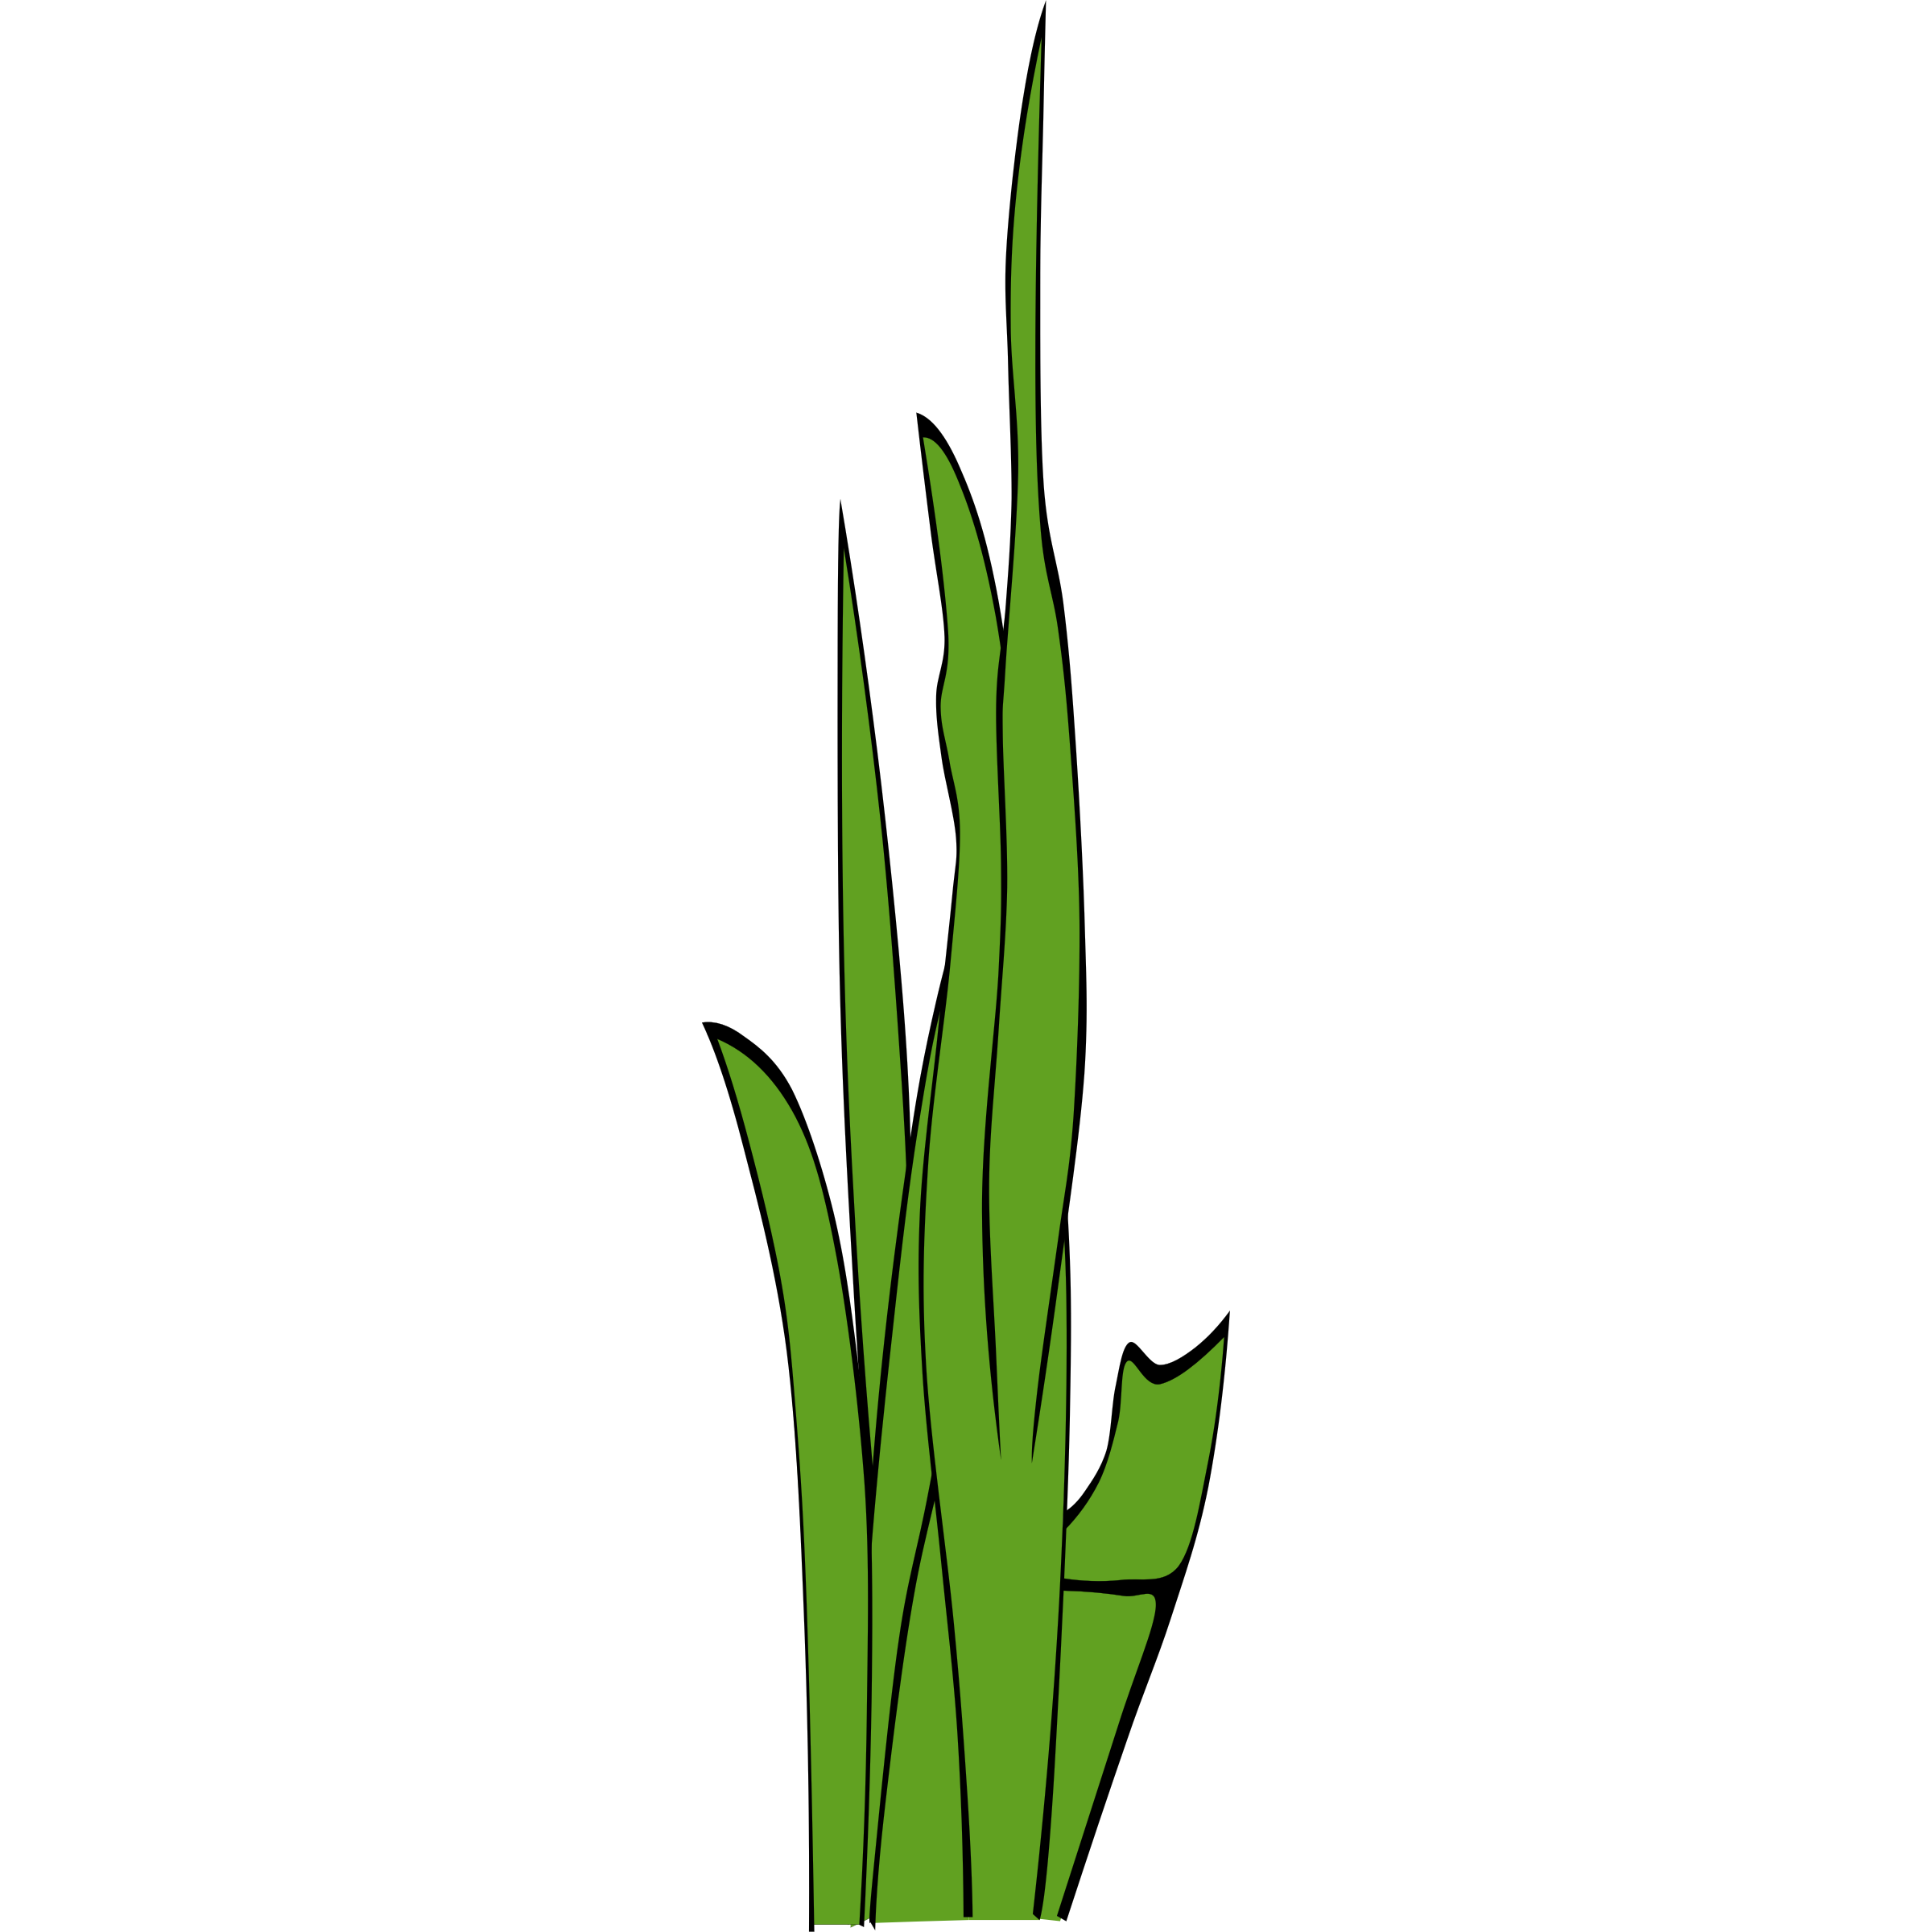 Other Clipart : Grass blades and clumps 3 